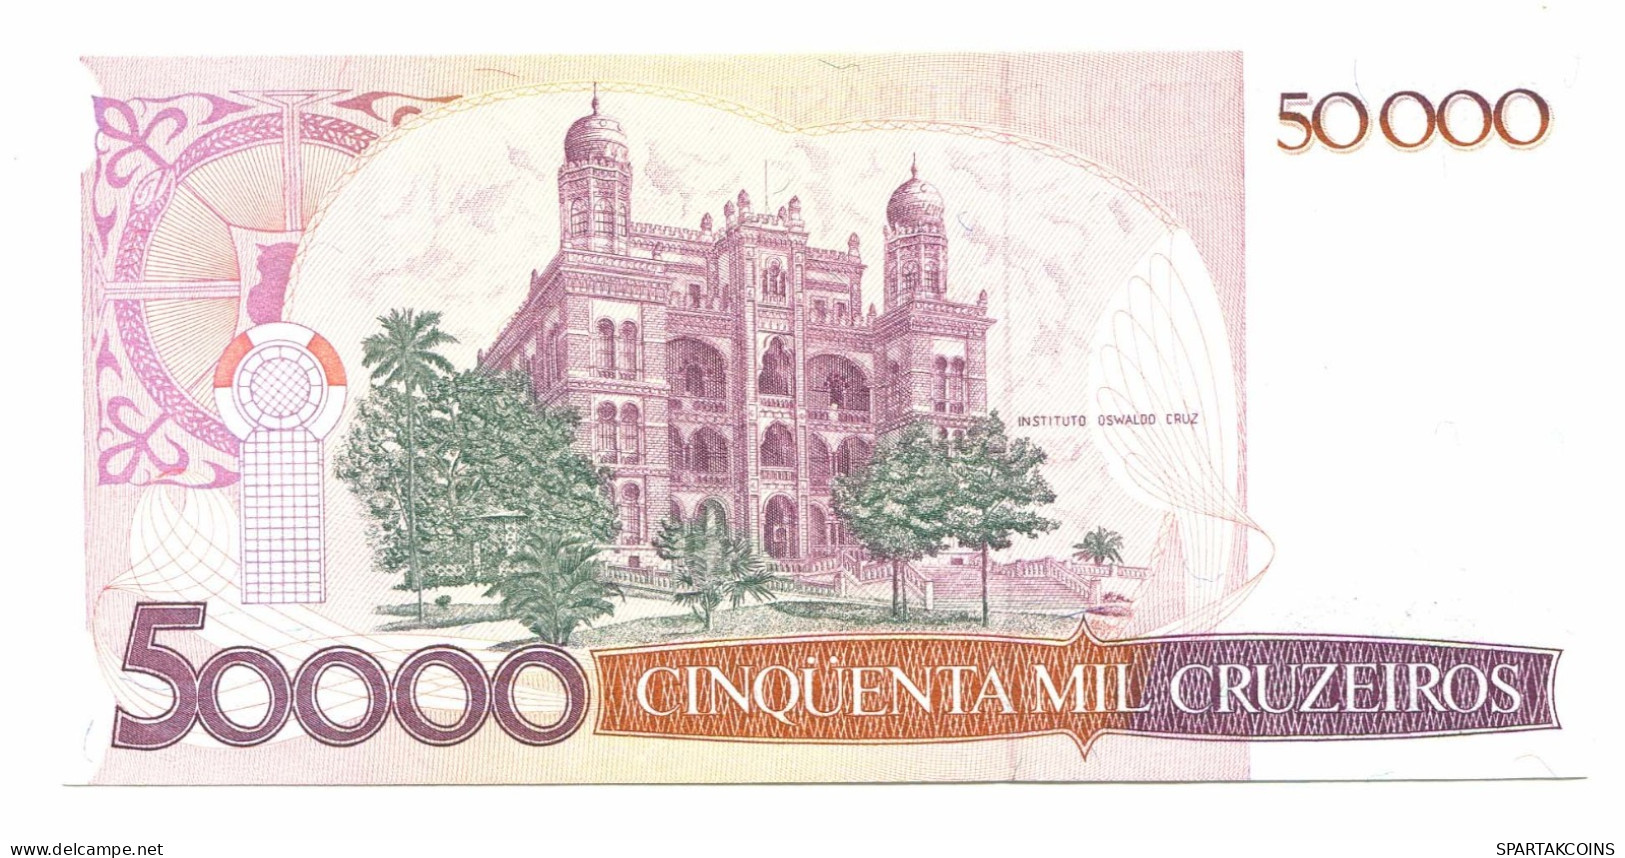 BRAZIL REPLACEMENT NOTE Star*A 50 CRUZADOS ON 50000 CRUZEIROS 1986 UNC P10995.6 - [11] Local Banknote Issues